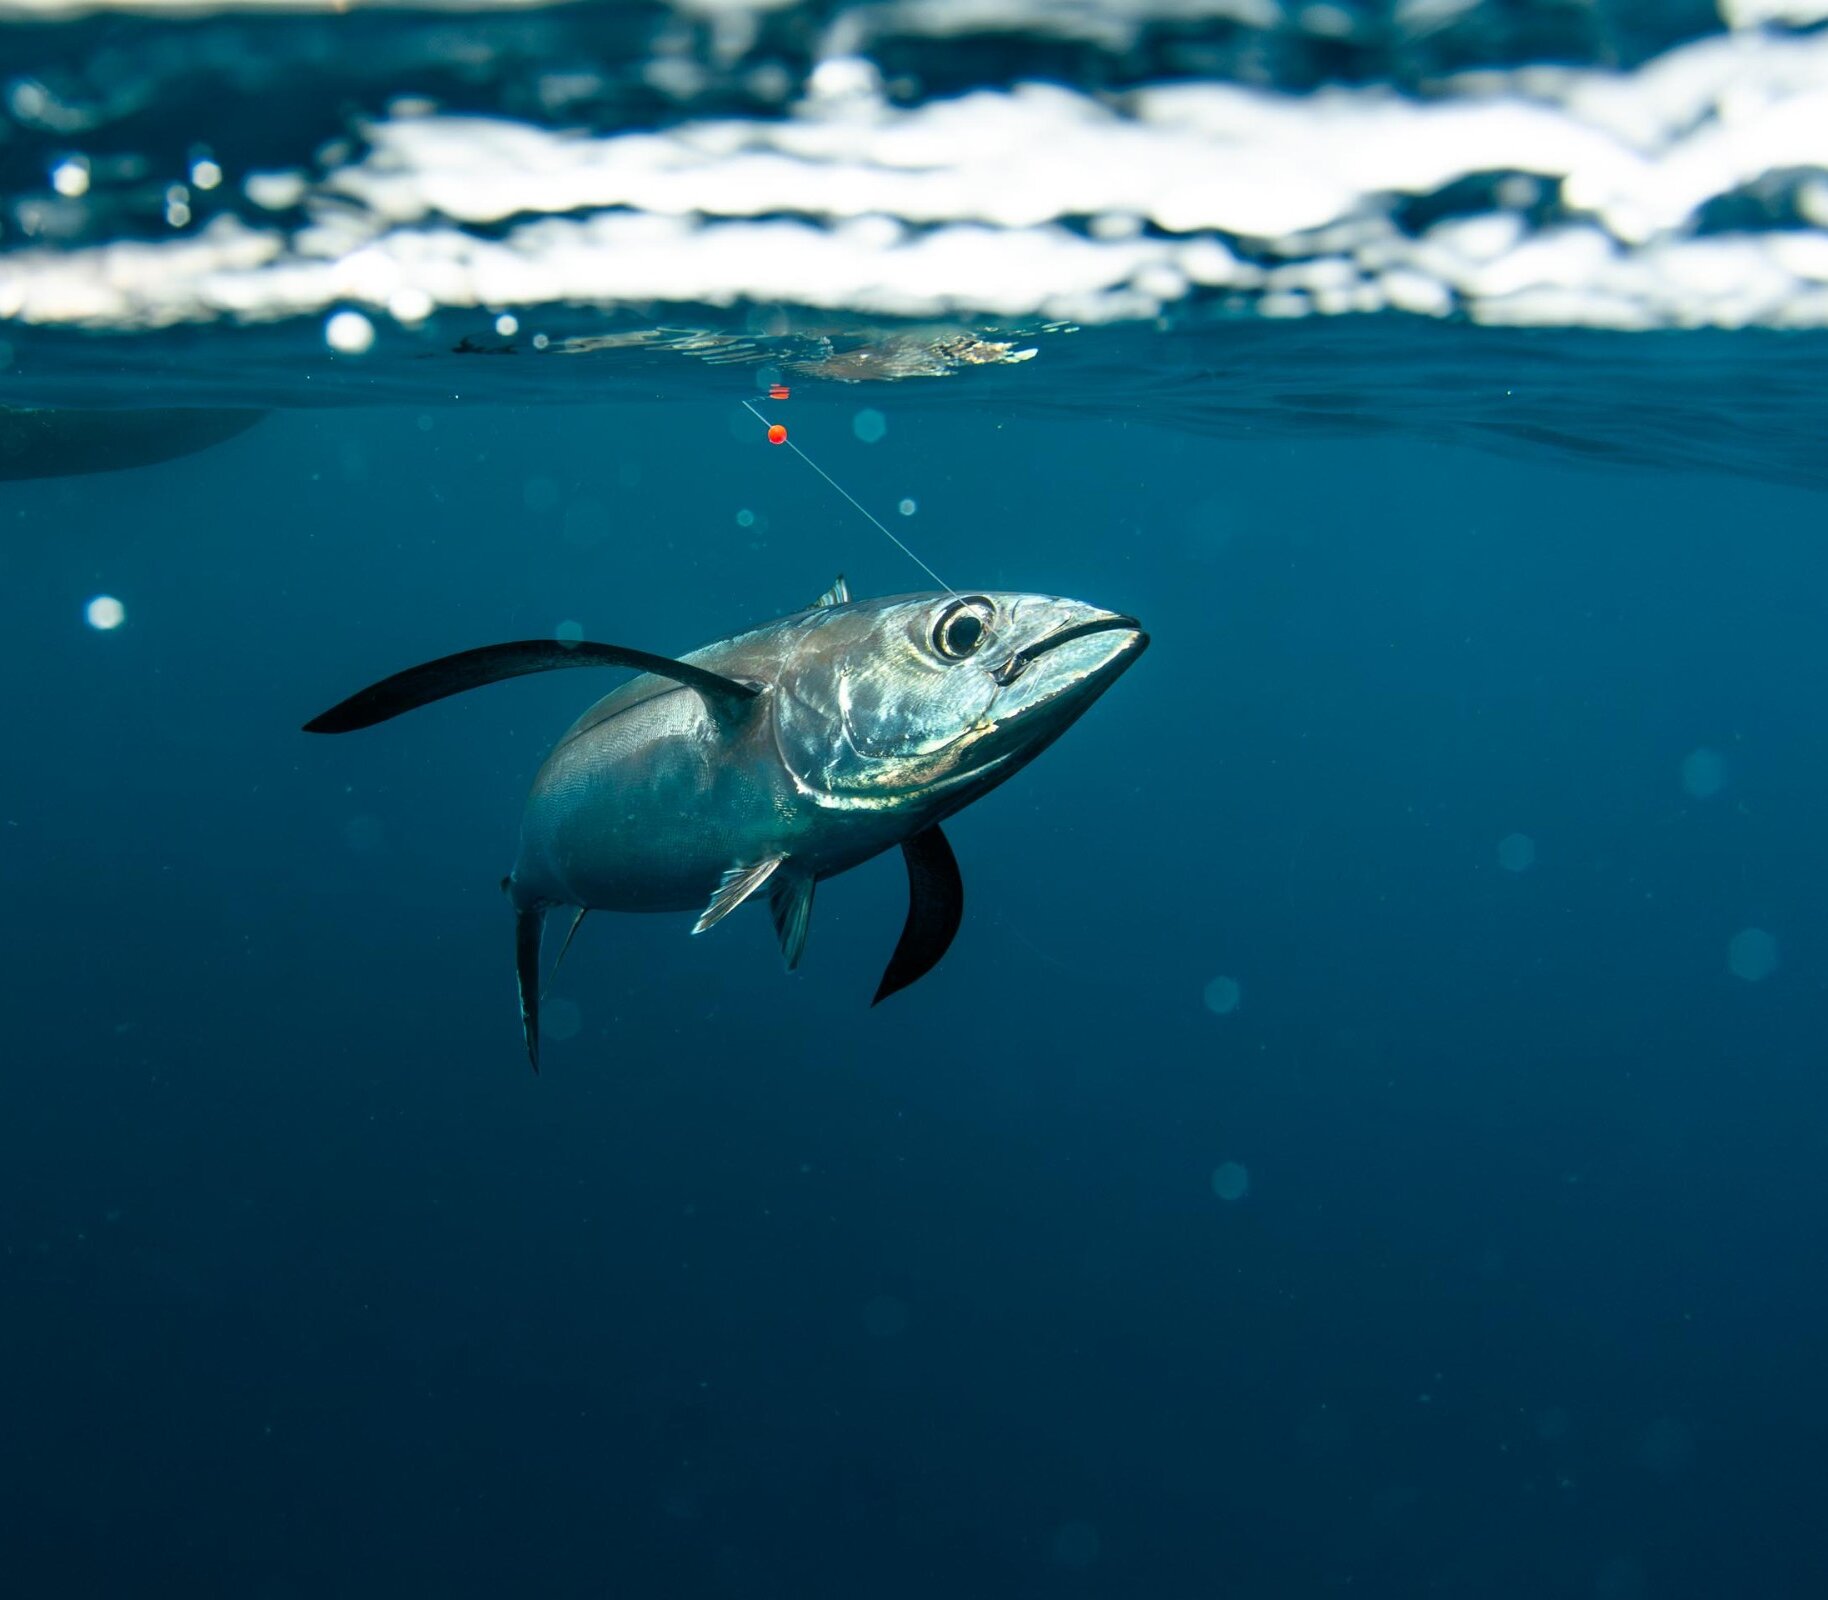 Underwater photo of a tuna with a hook and line in its mouth